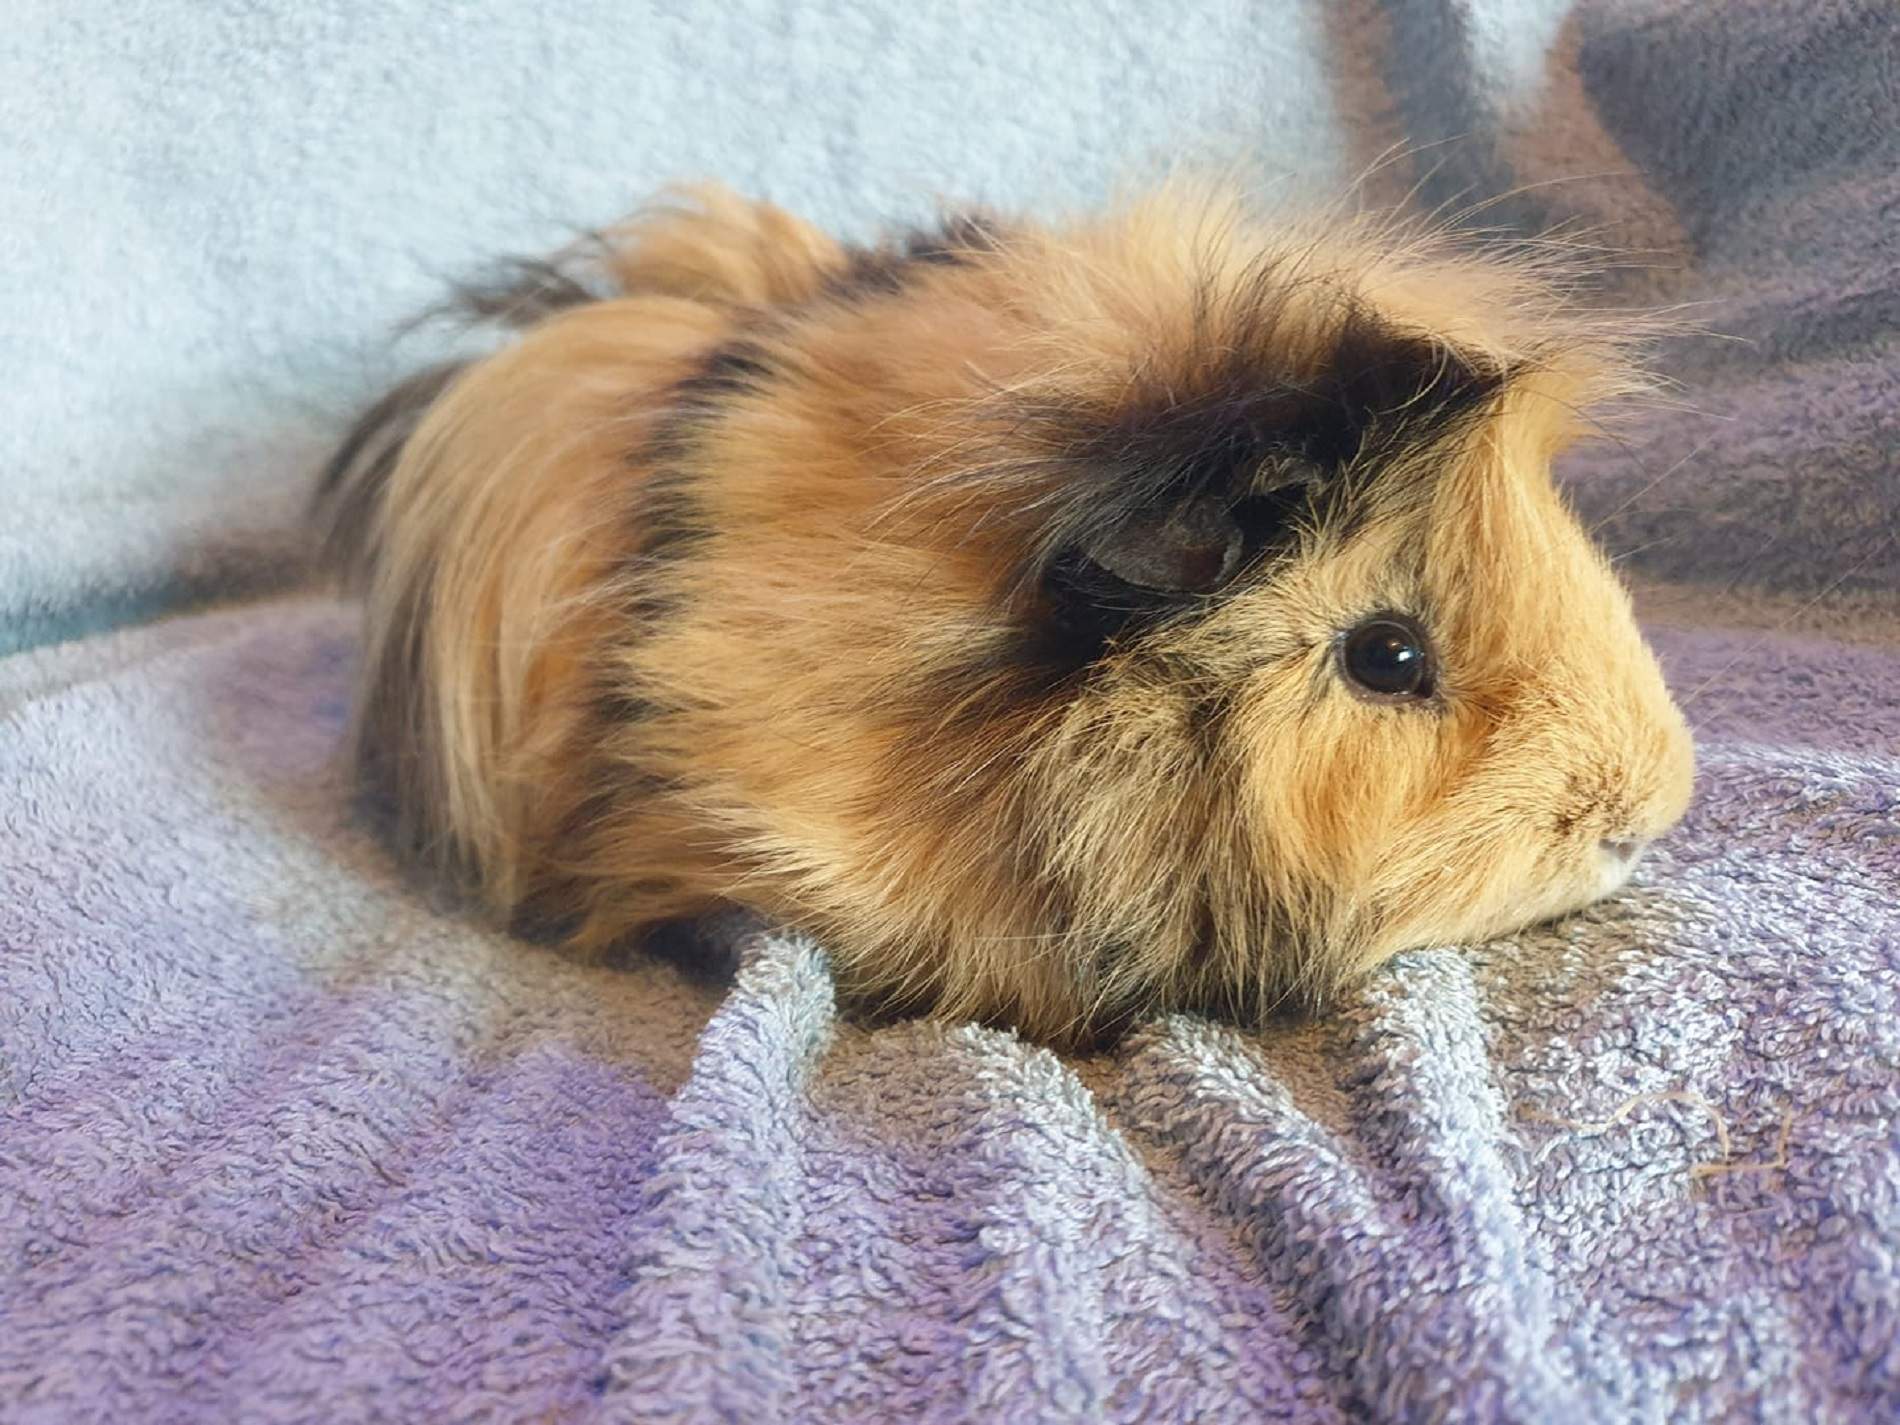 GINGEE (was GINGER) July 2019 to November 8th 2022